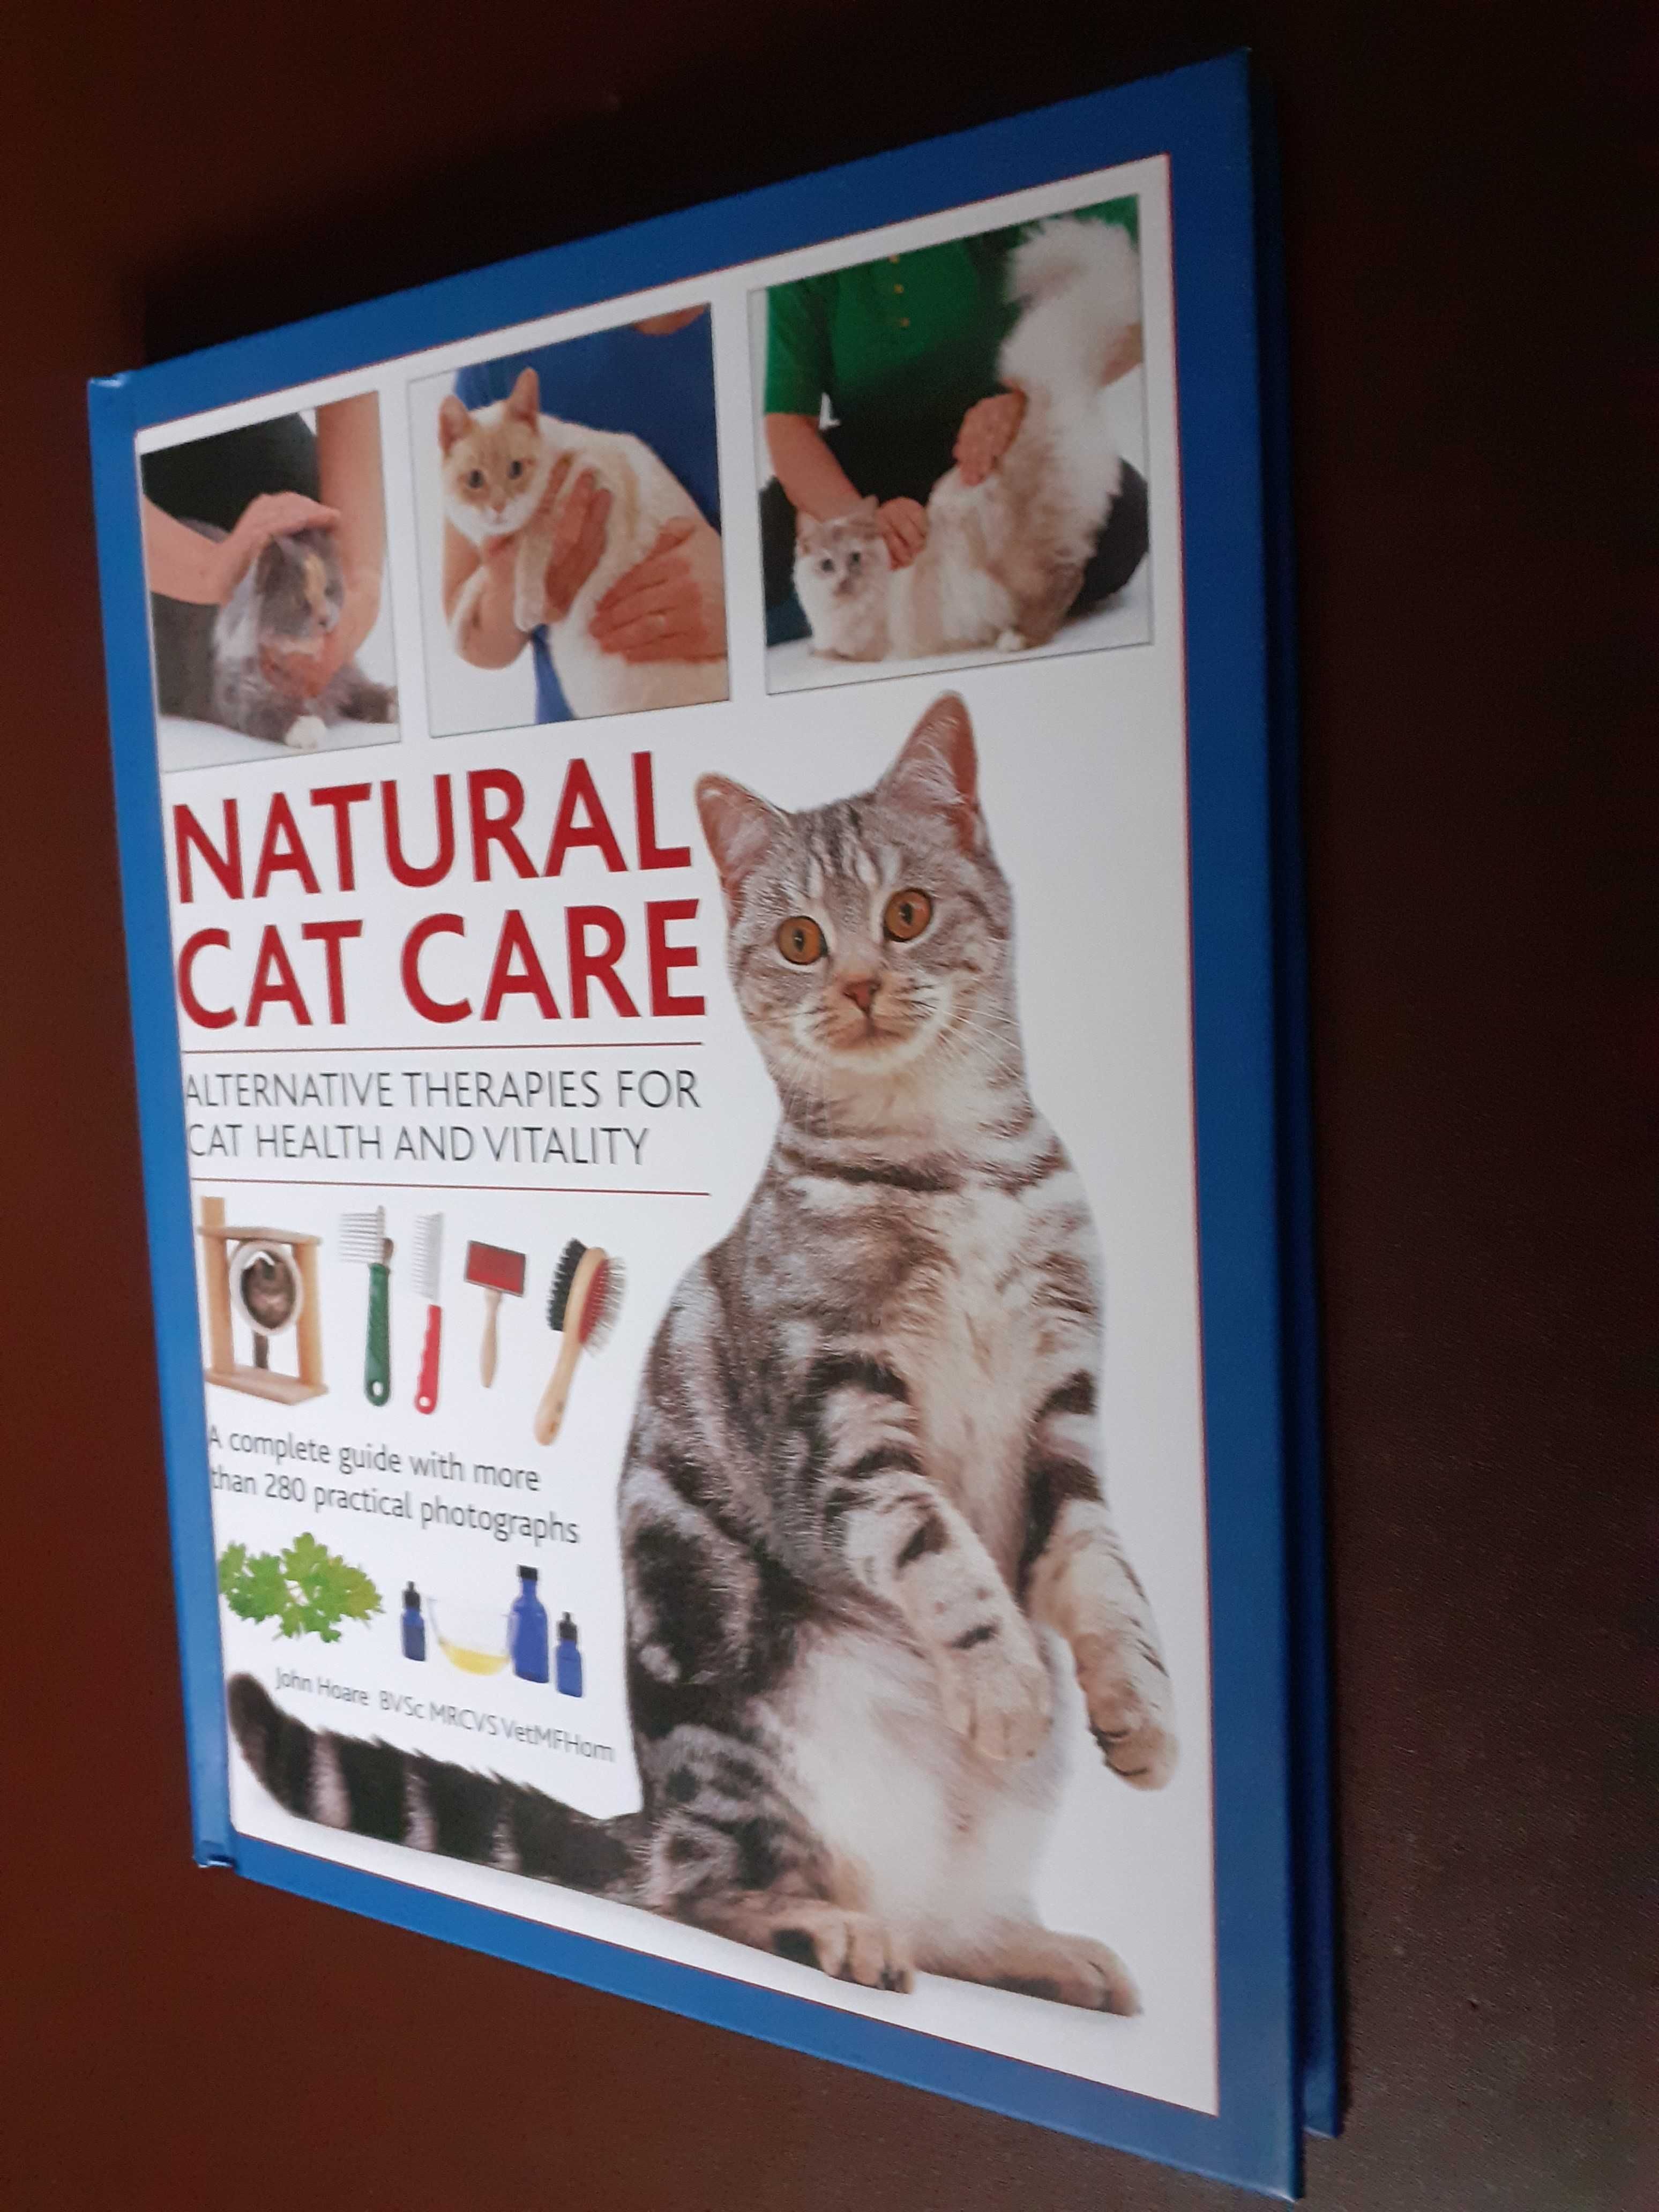 Natural cat care - alternative therapies for cat health and vitality